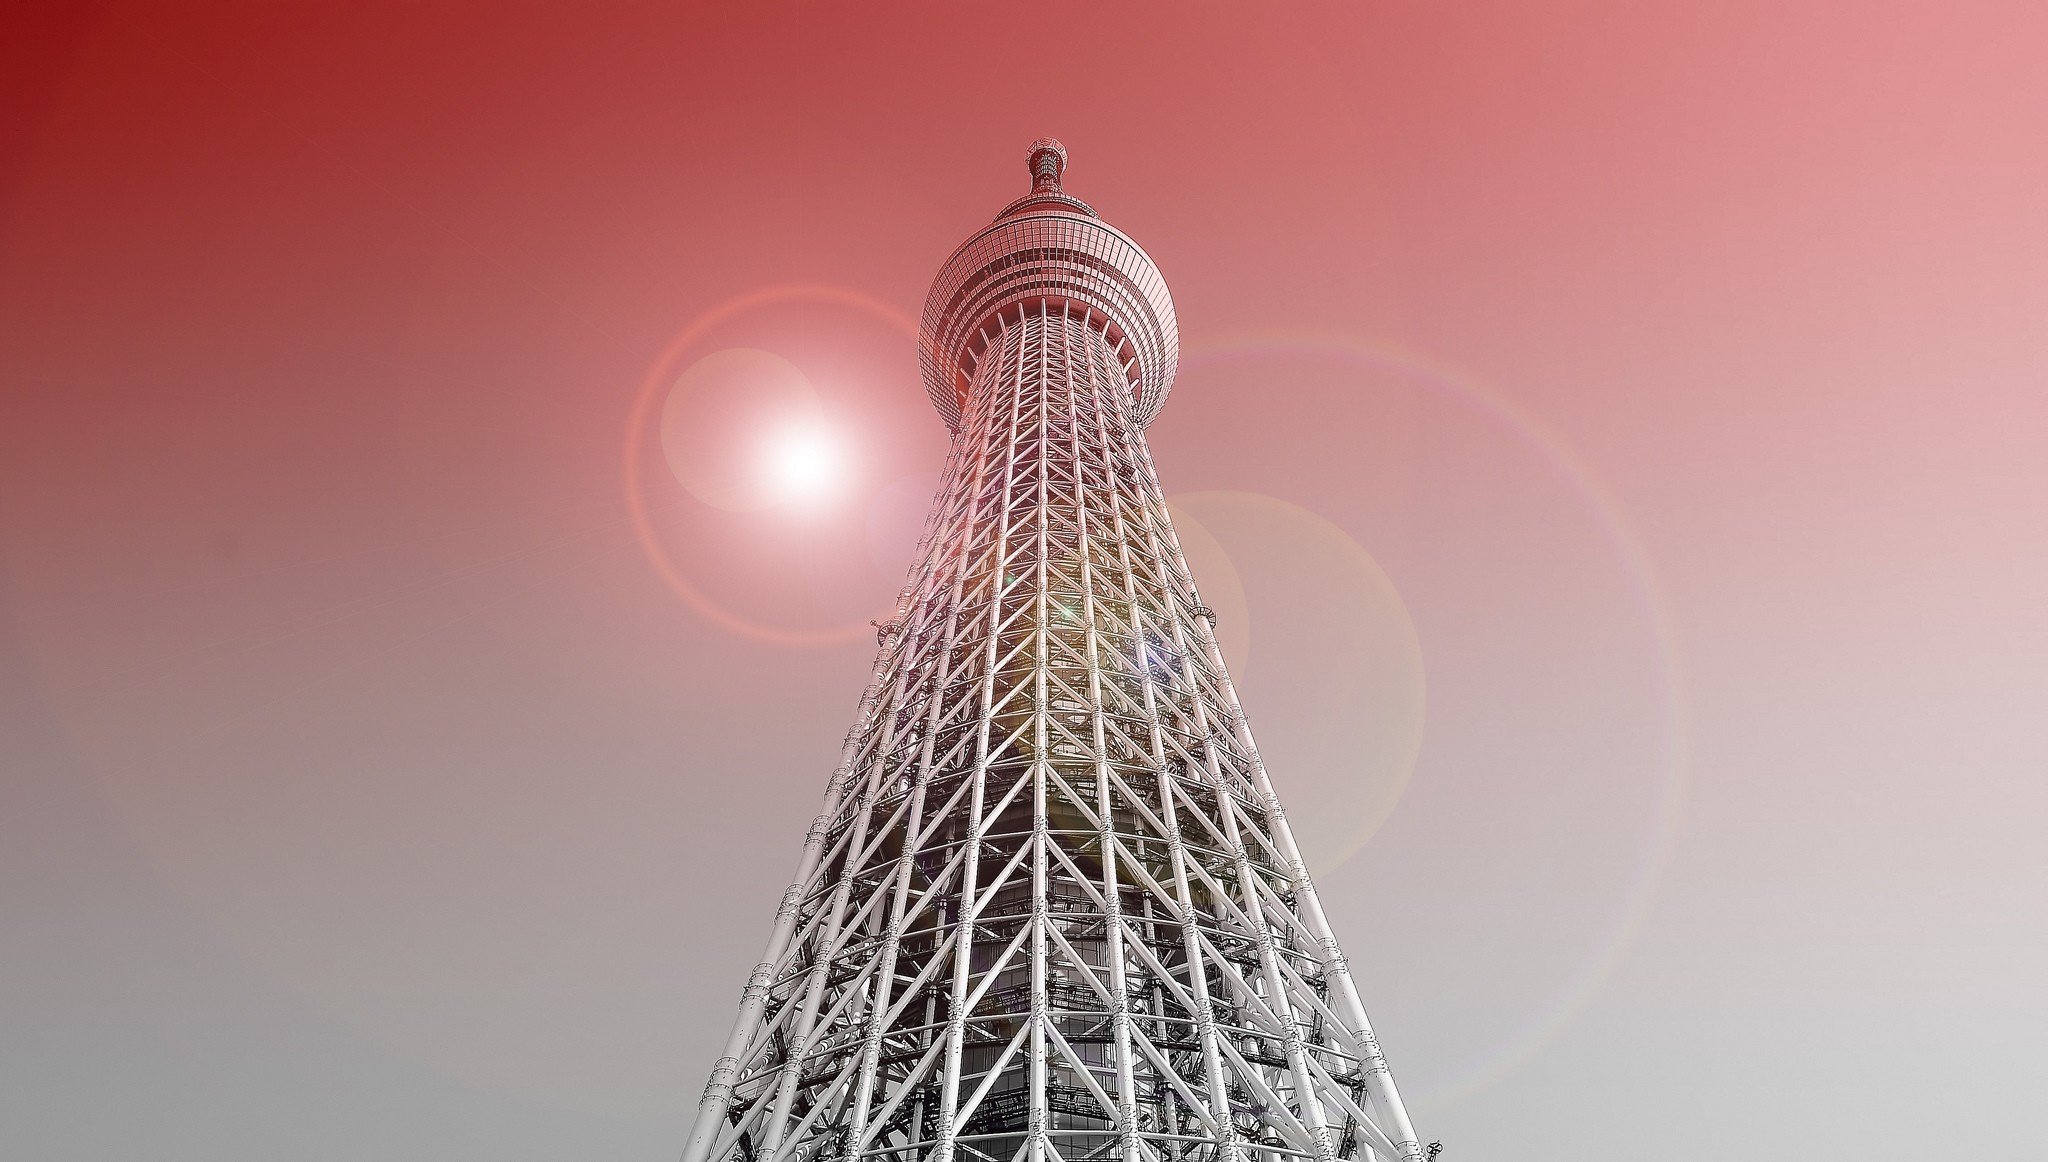 Skytree, Tower, Japan, Tokyo, Lens flare, Architecture Wallpaper